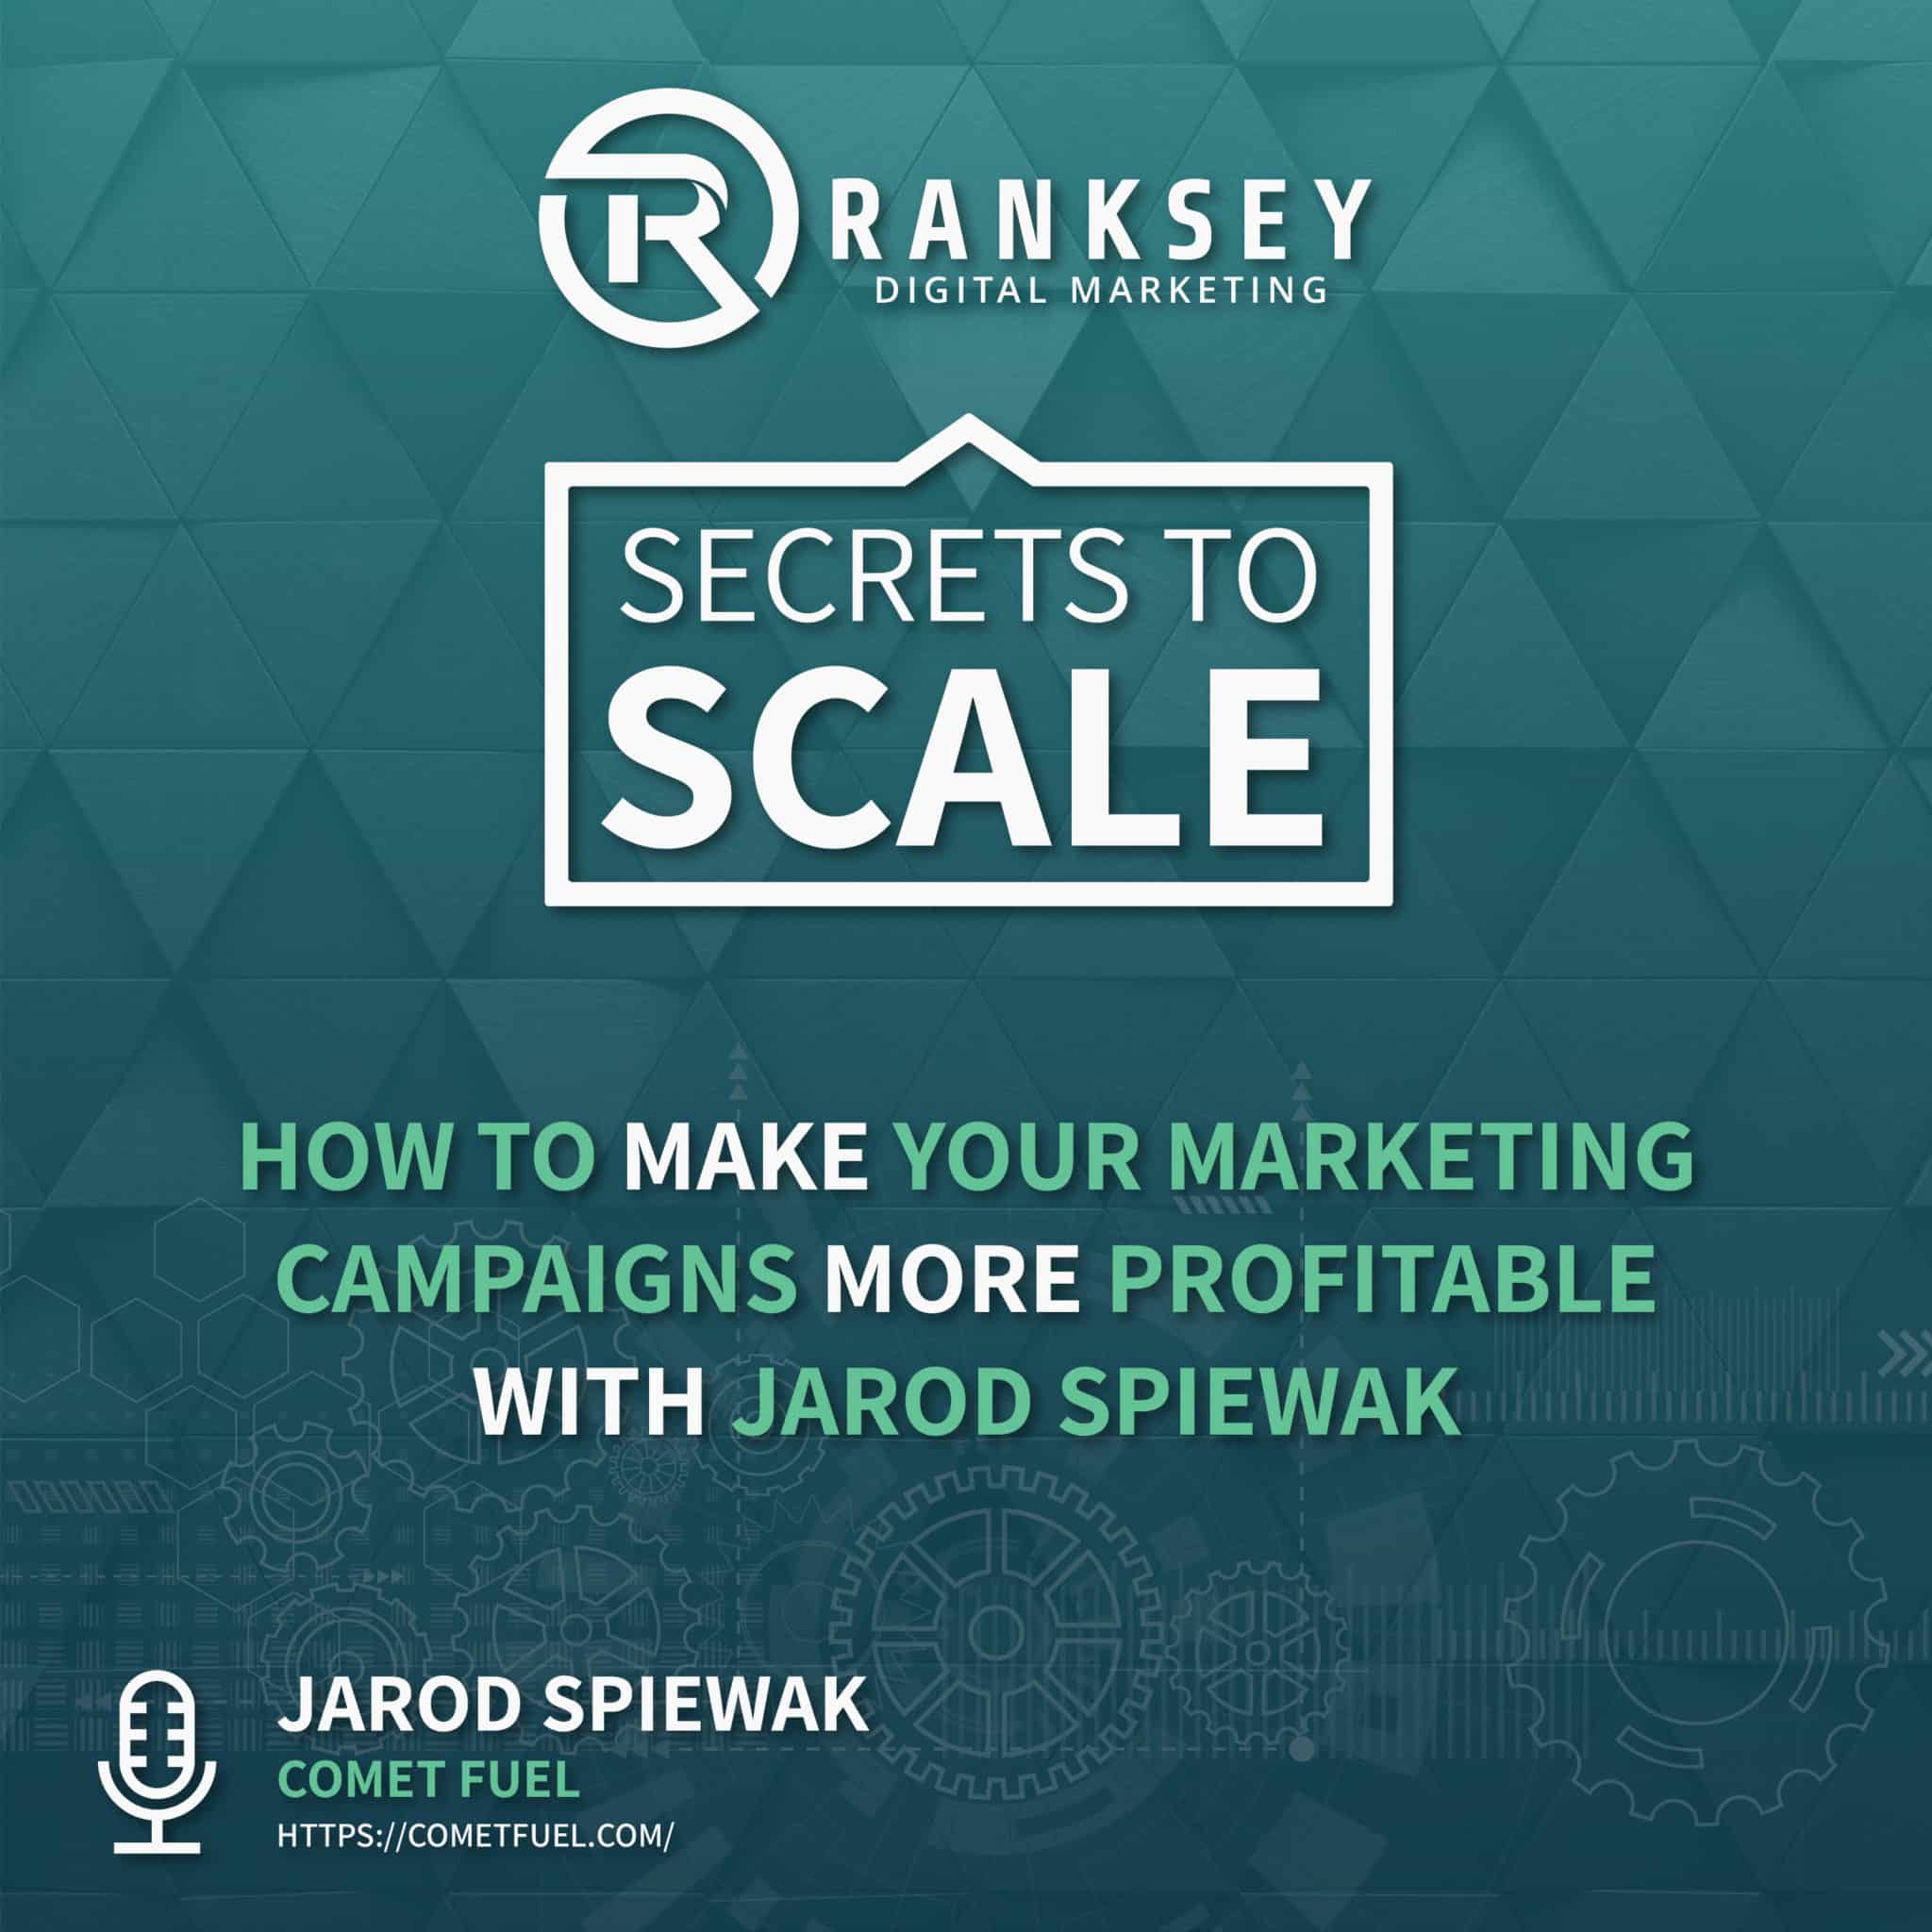 060 - How To Make Your Marketing Campaigns More Profitable With Jarod Spiewak